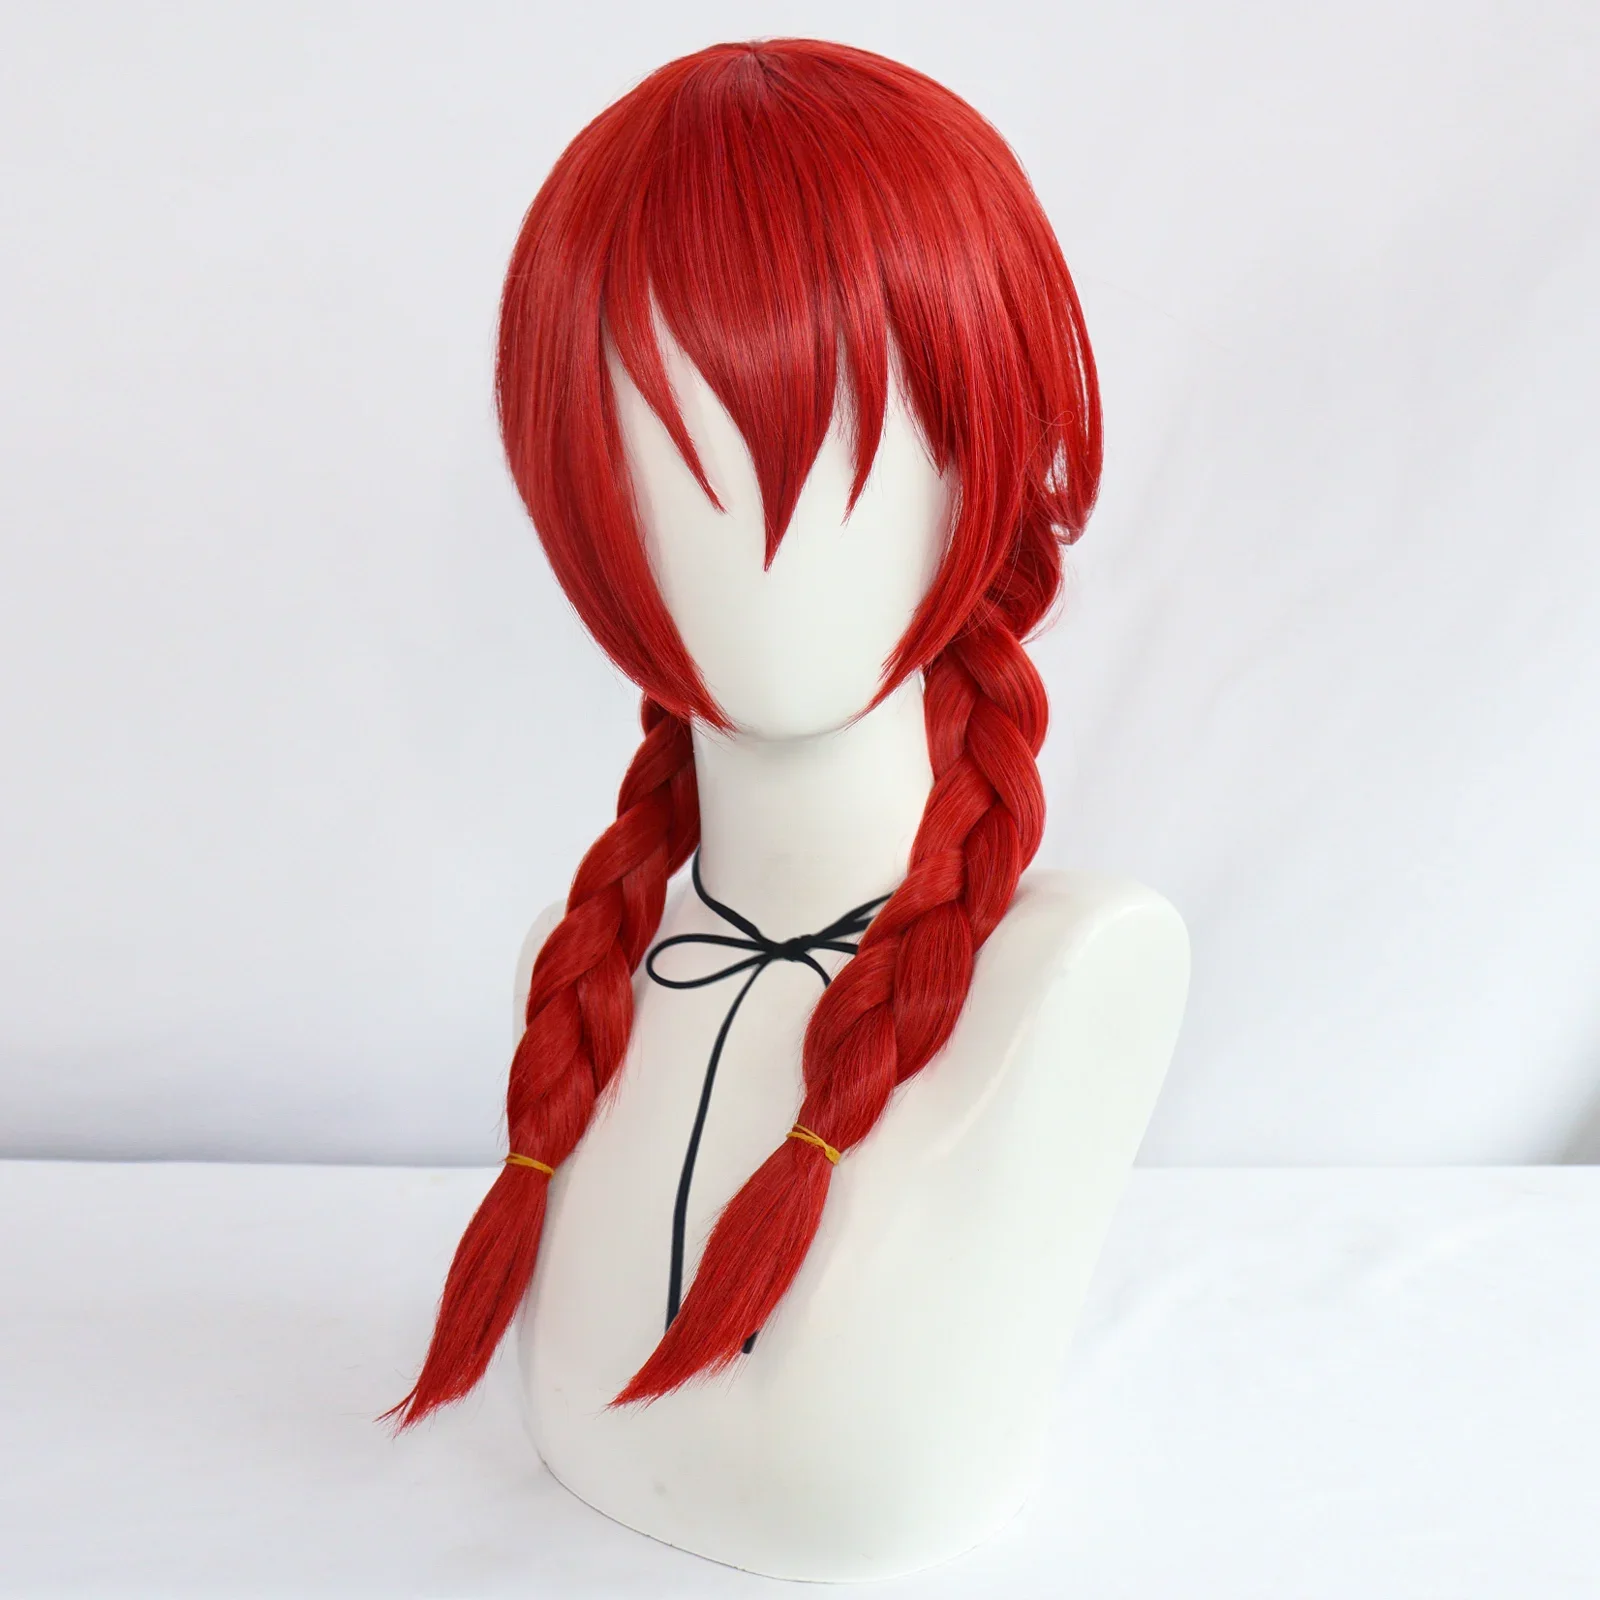 

20inch Braid Anime Blend S Long Synthetic Red Pigtail Amano Miu Costume Cosplay Wig for Halloween Christmas School Thanksgiving